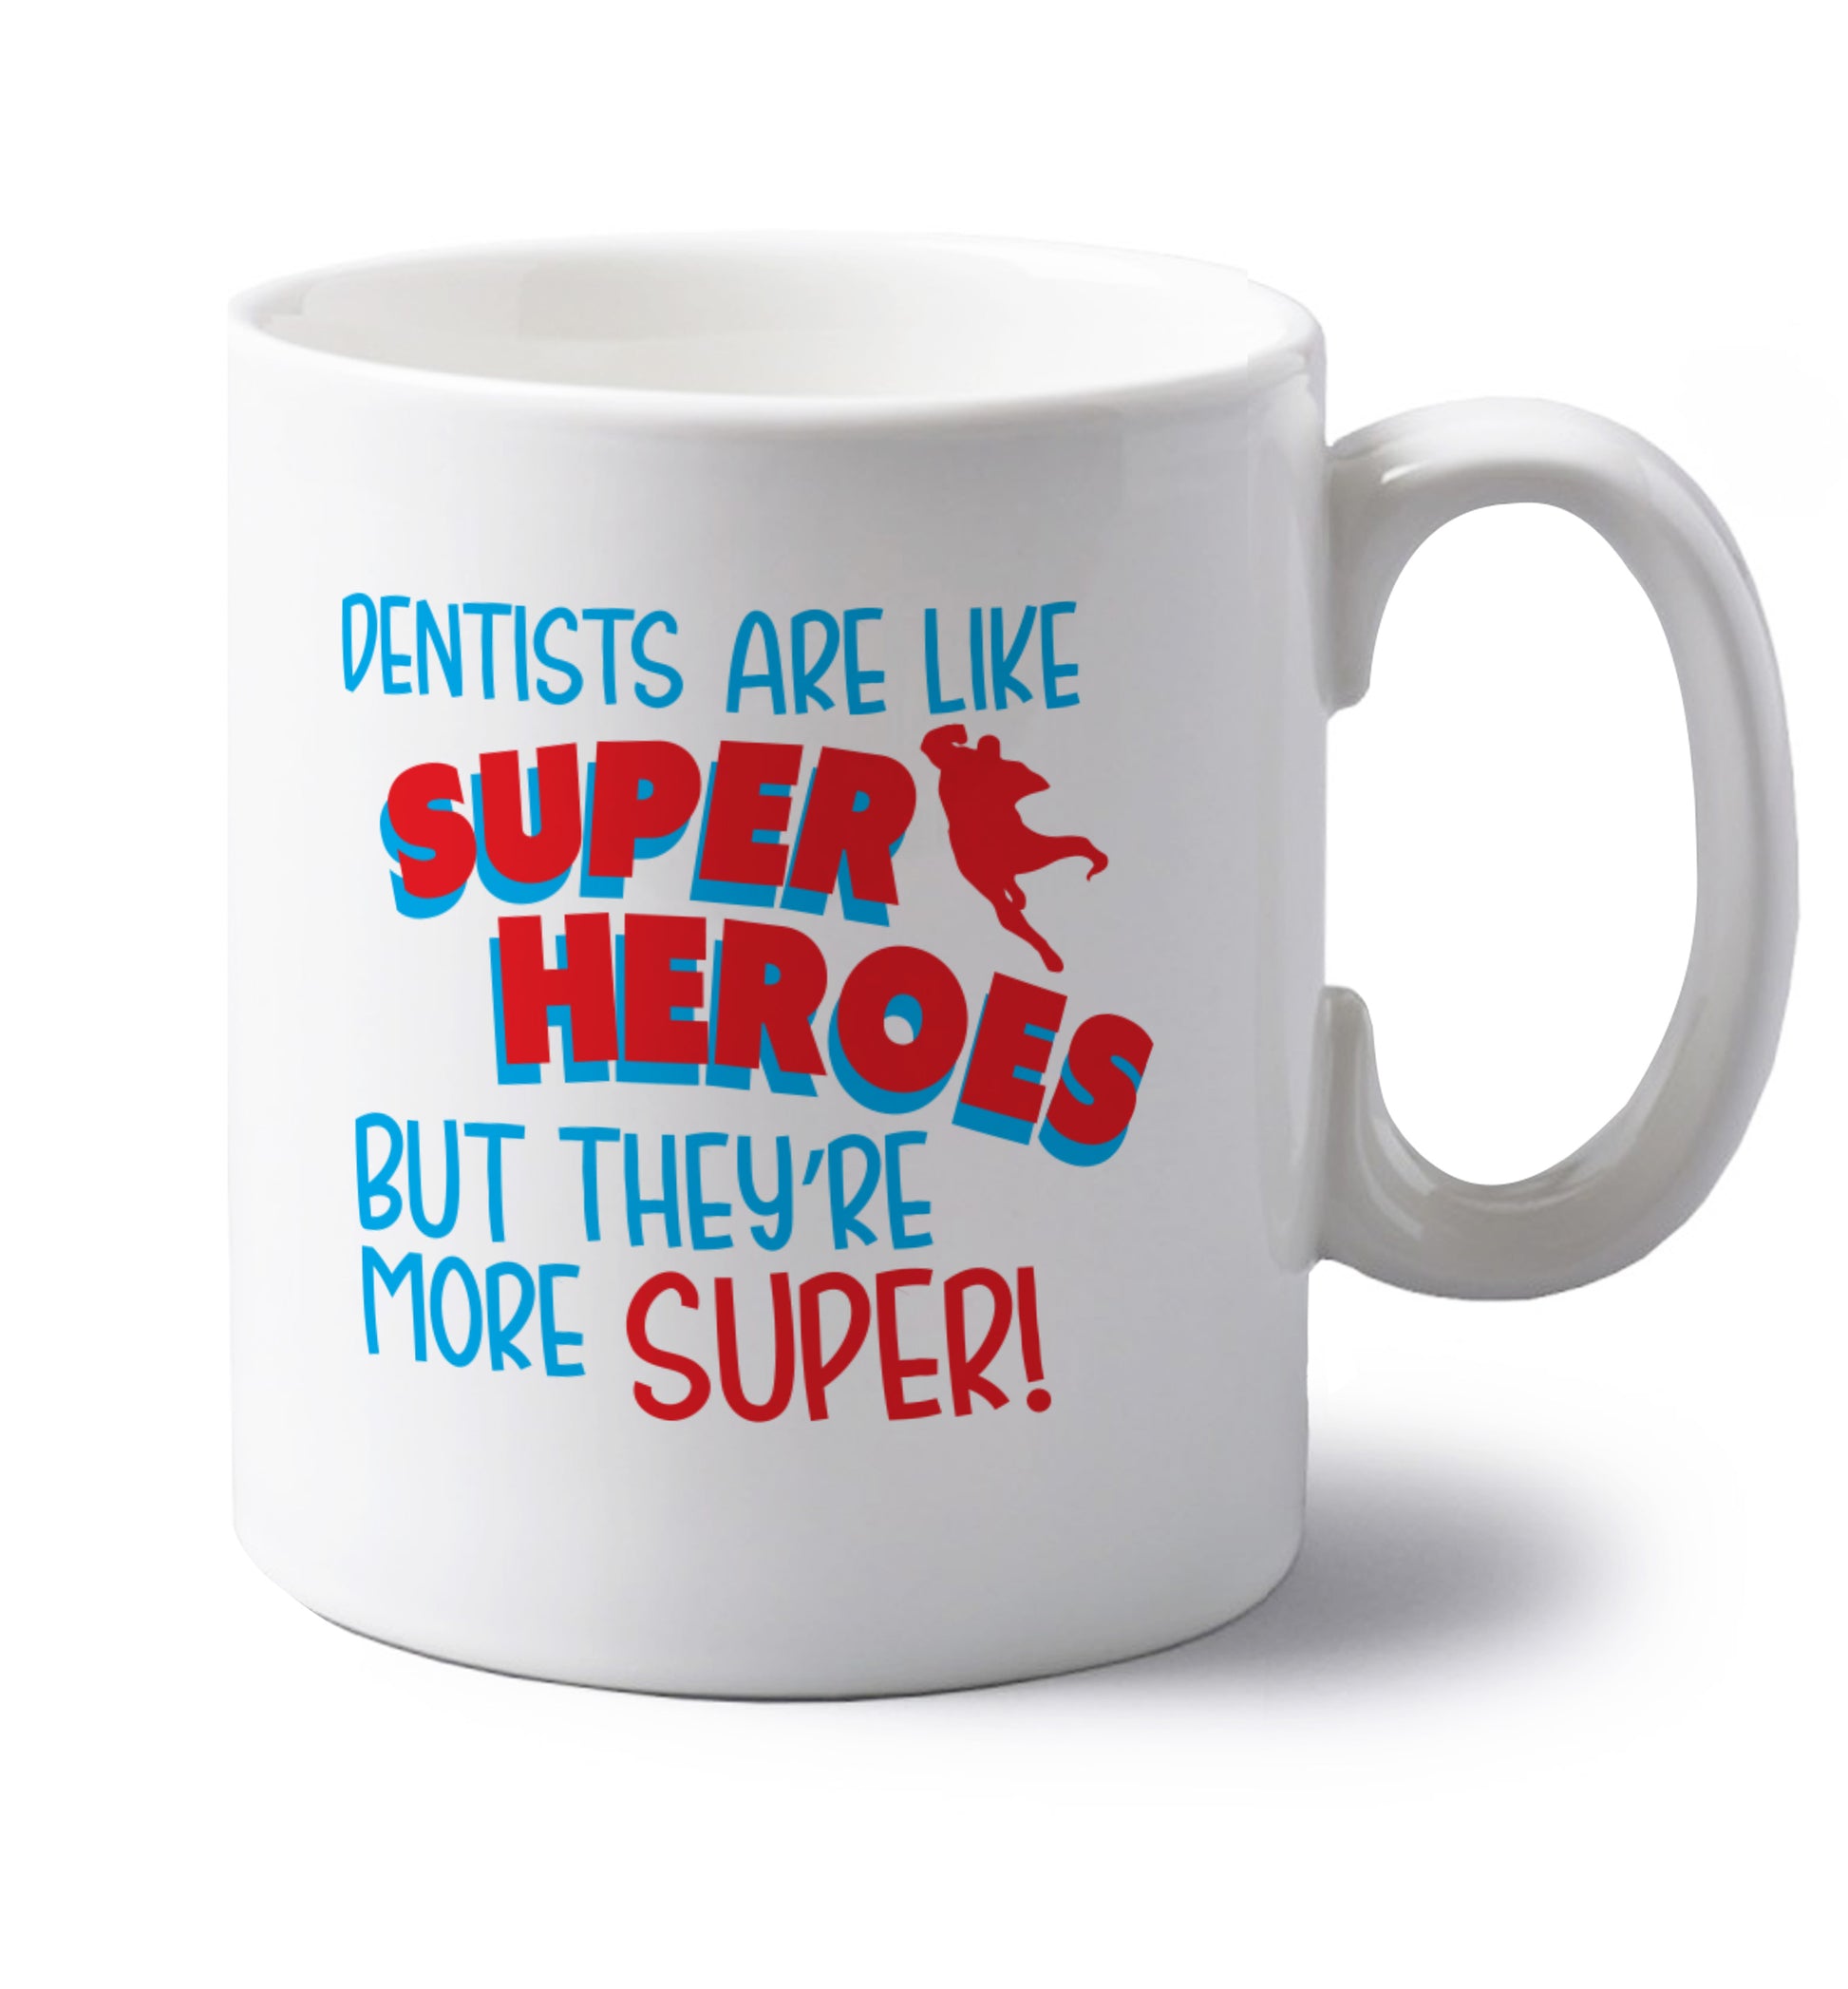 Dentists are like superheros but they're more super left handed white ceramic mug 